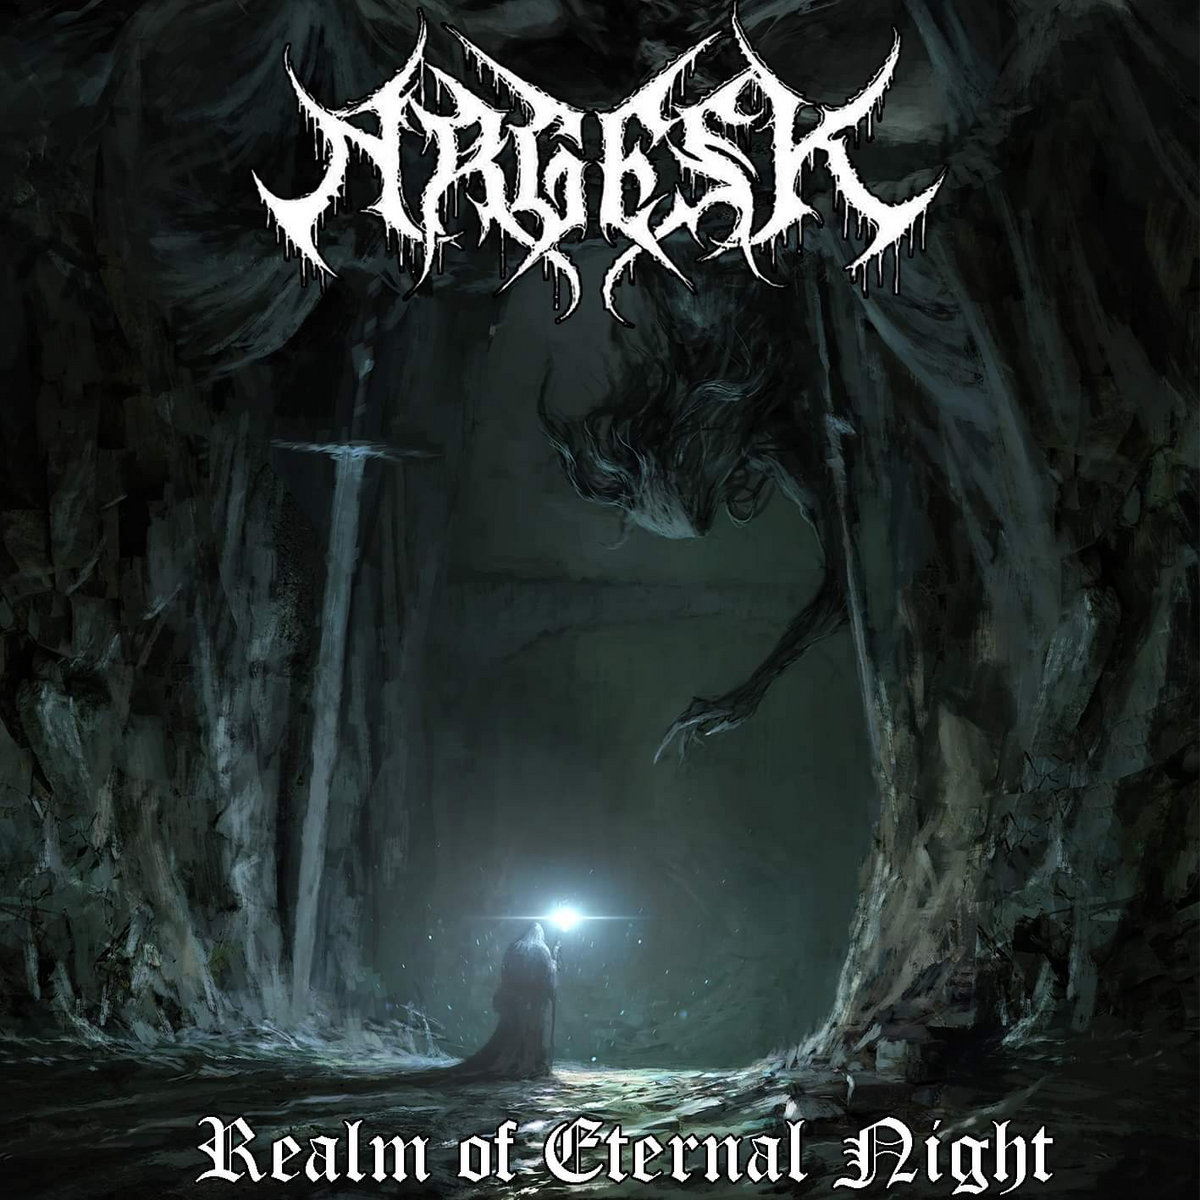 argesk – realm of eternal night